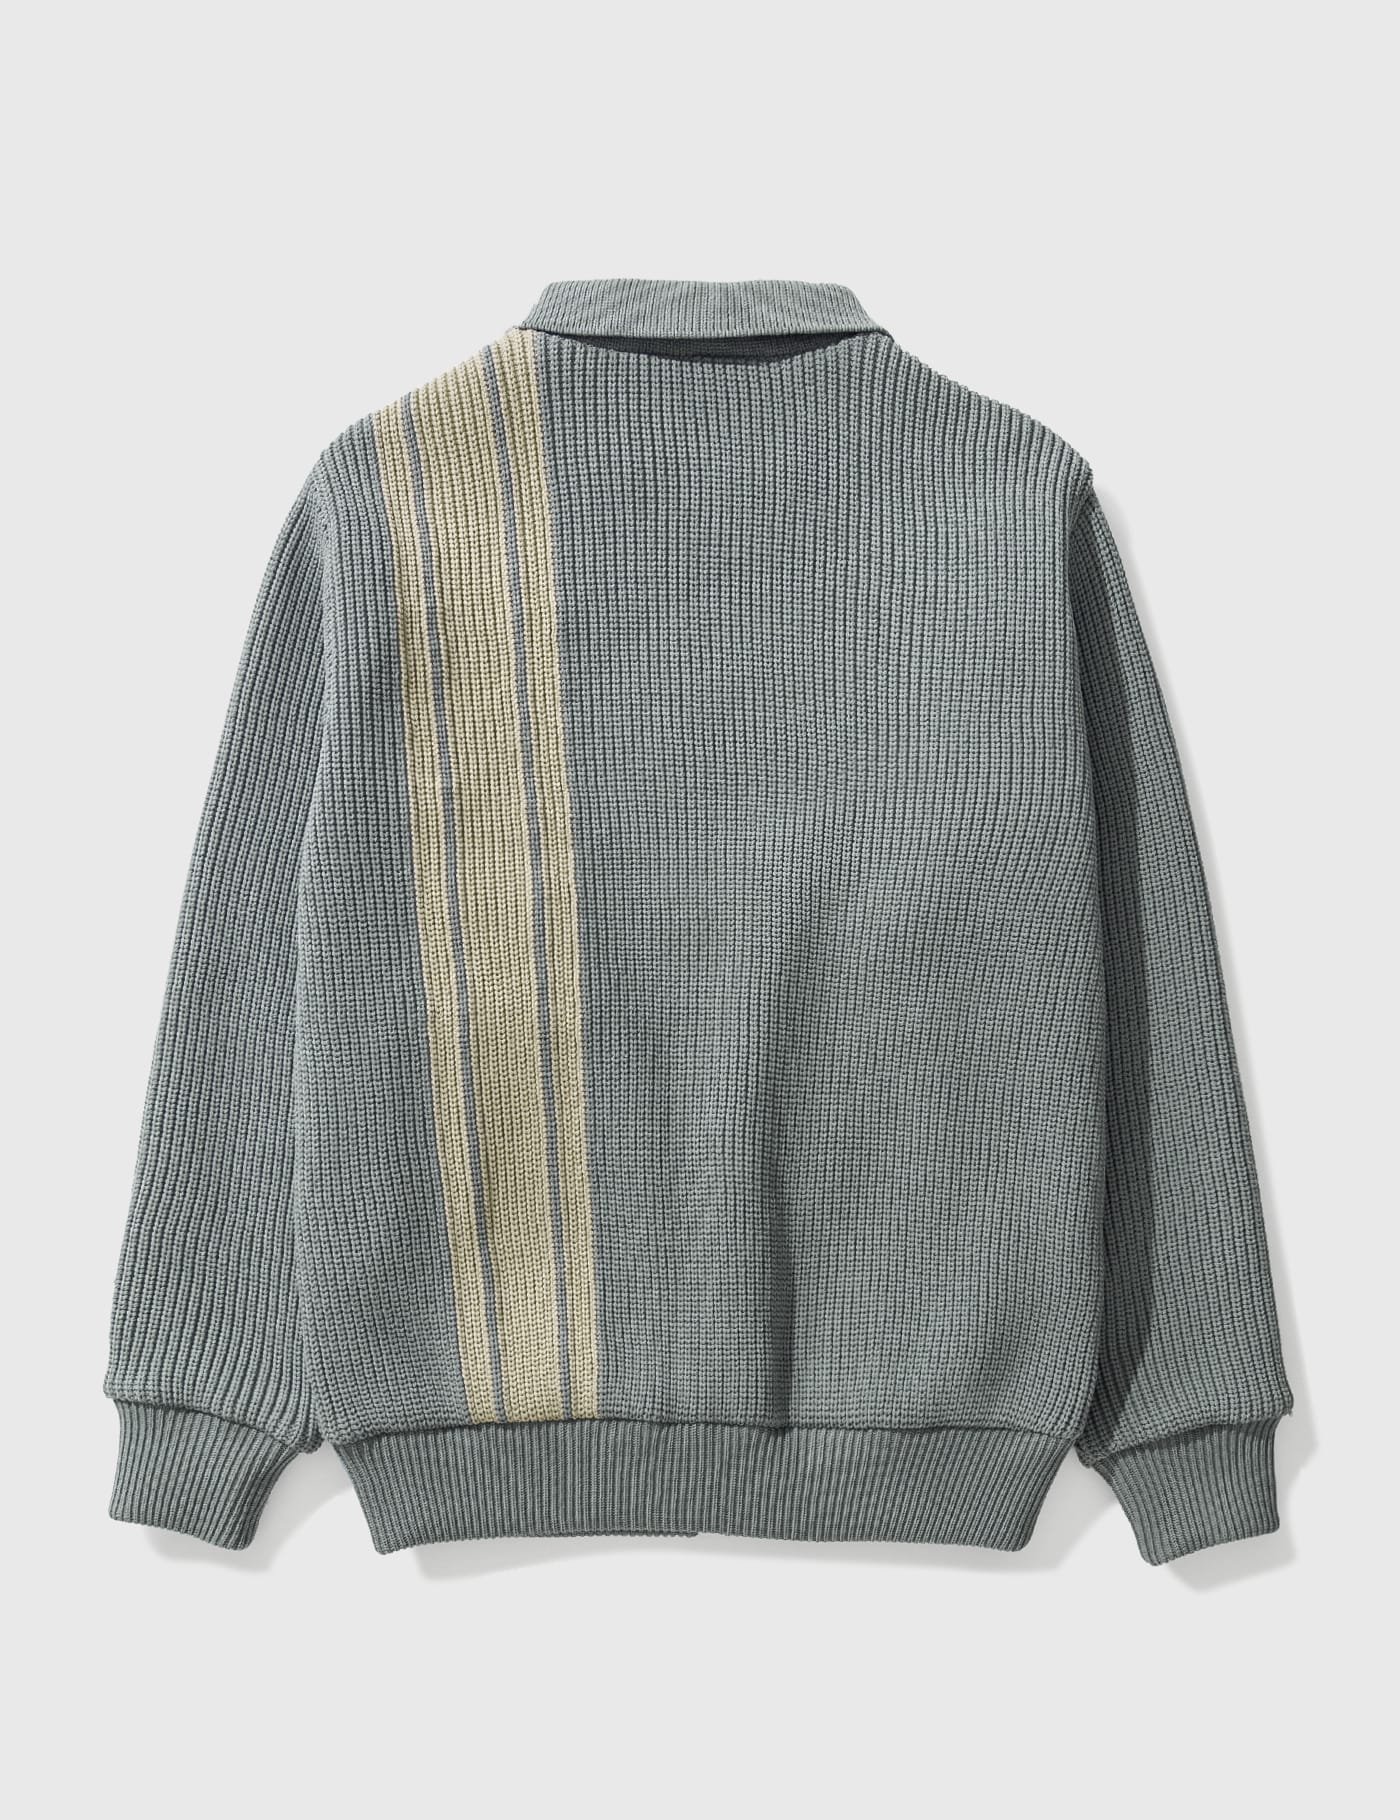 CarService - Racing Knit Jacket | HBX - Globally Curated Fashion